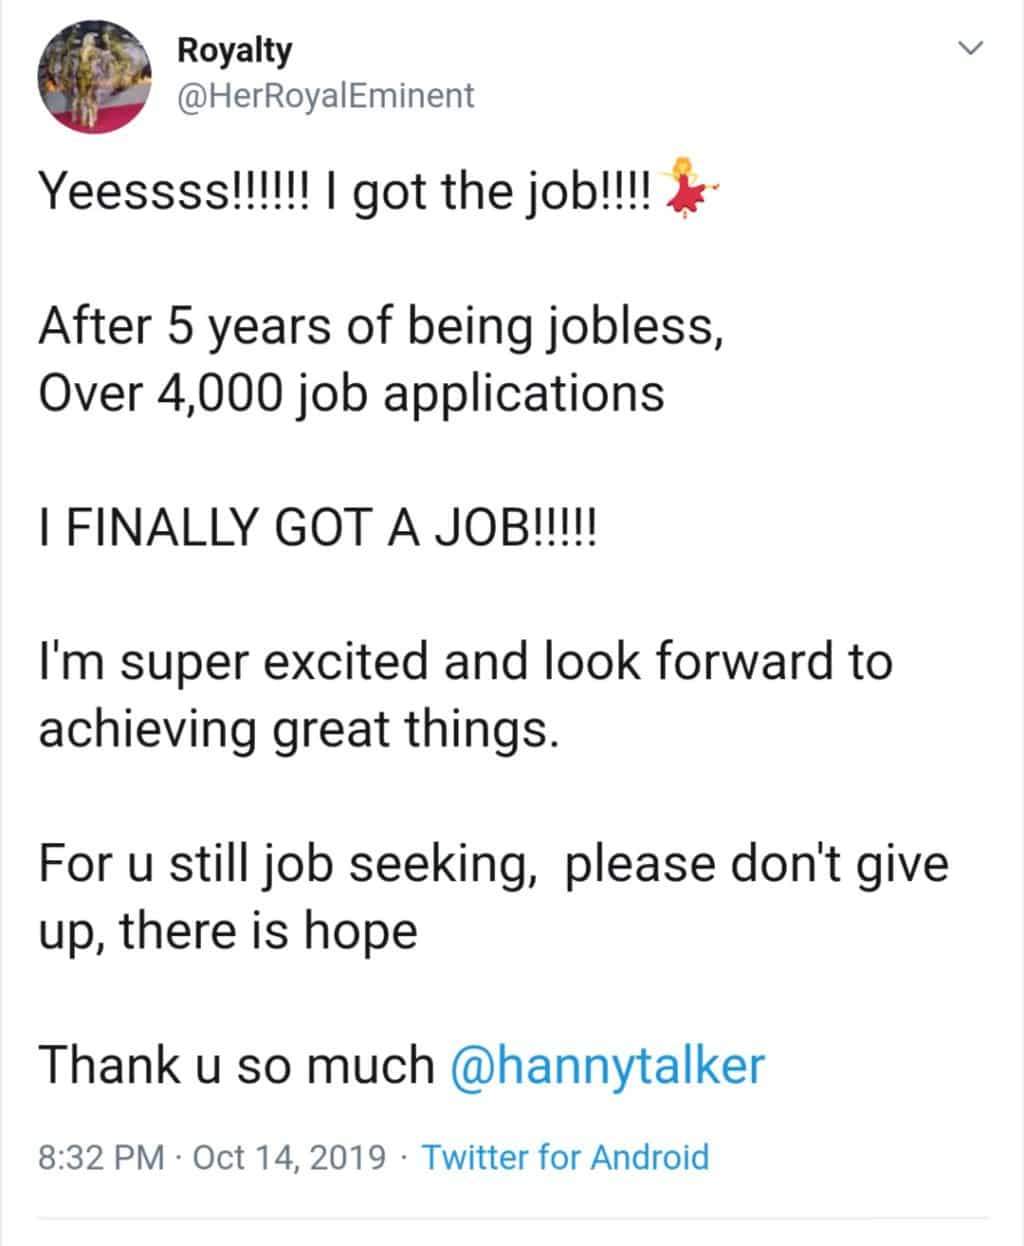 Lady finally gets a job after submitting 4000 applications in five years